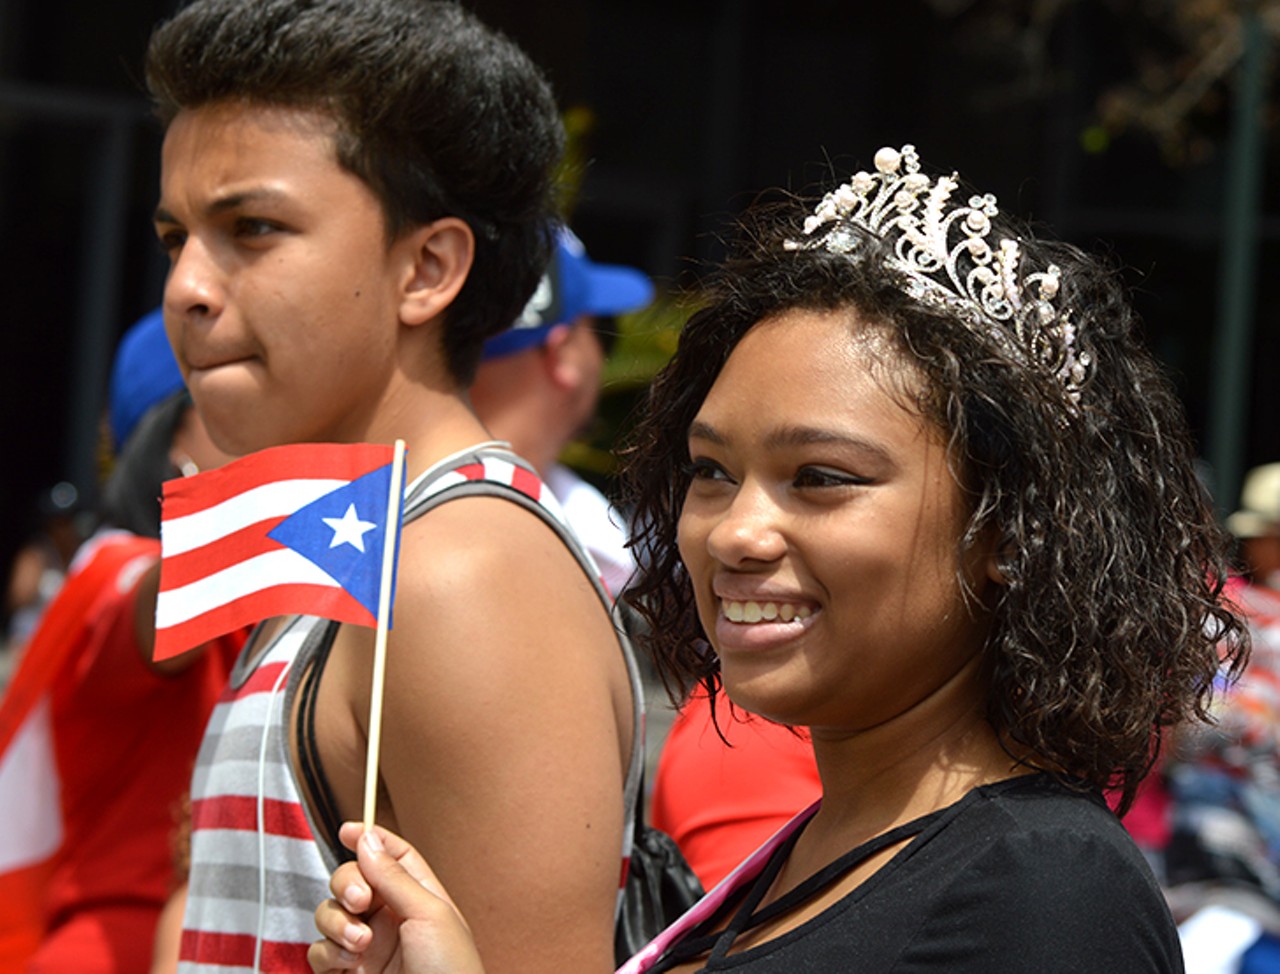 Photos from the Puerto Rican parade and festival in downtown Orlando